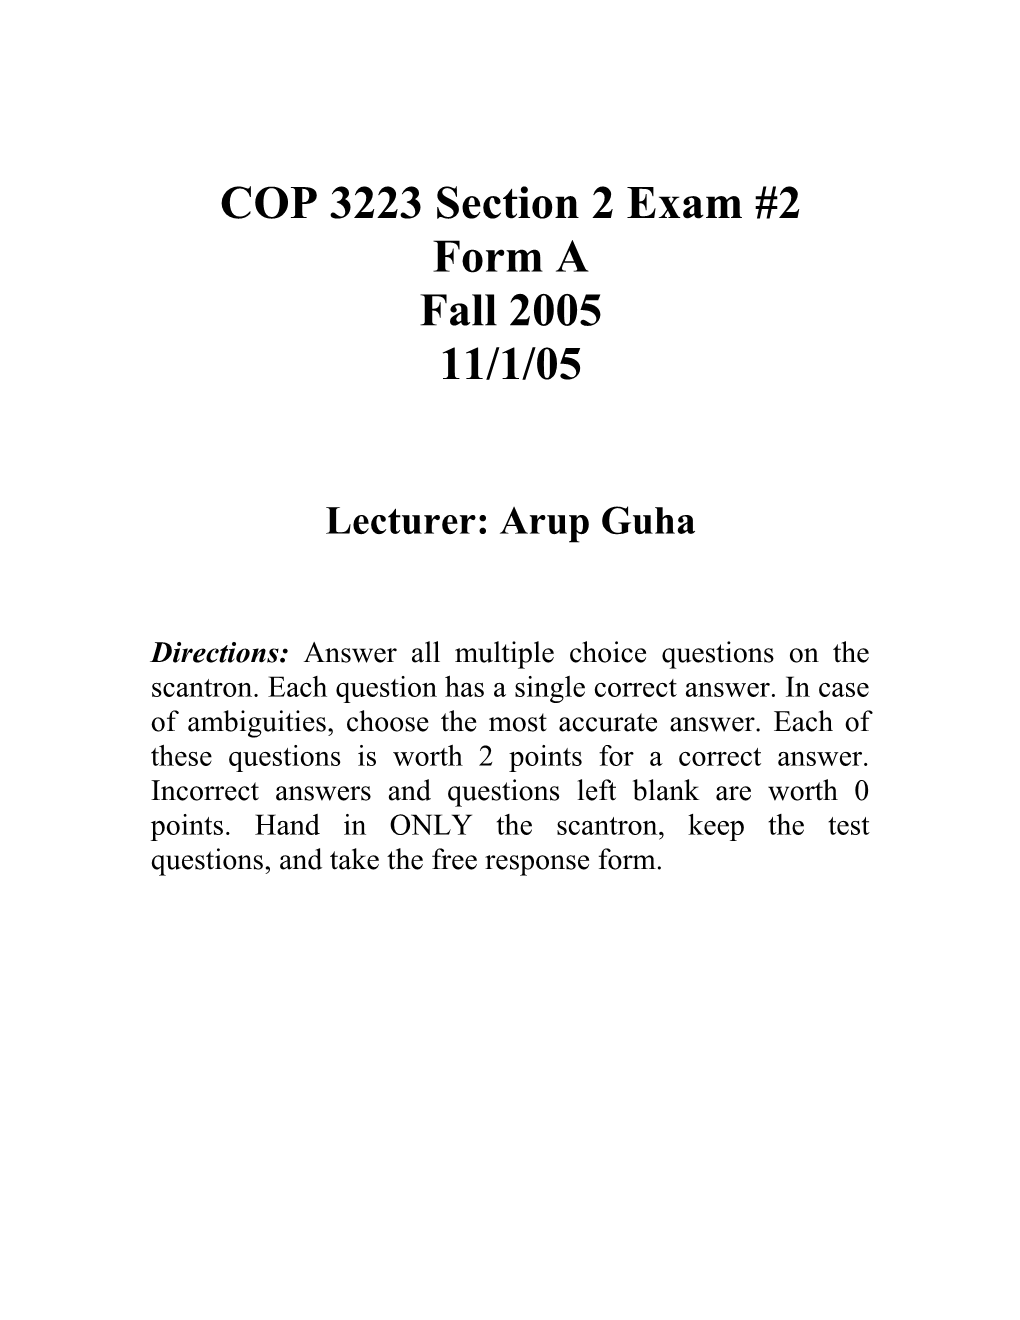 COP 3223 Section 2 Exam #2